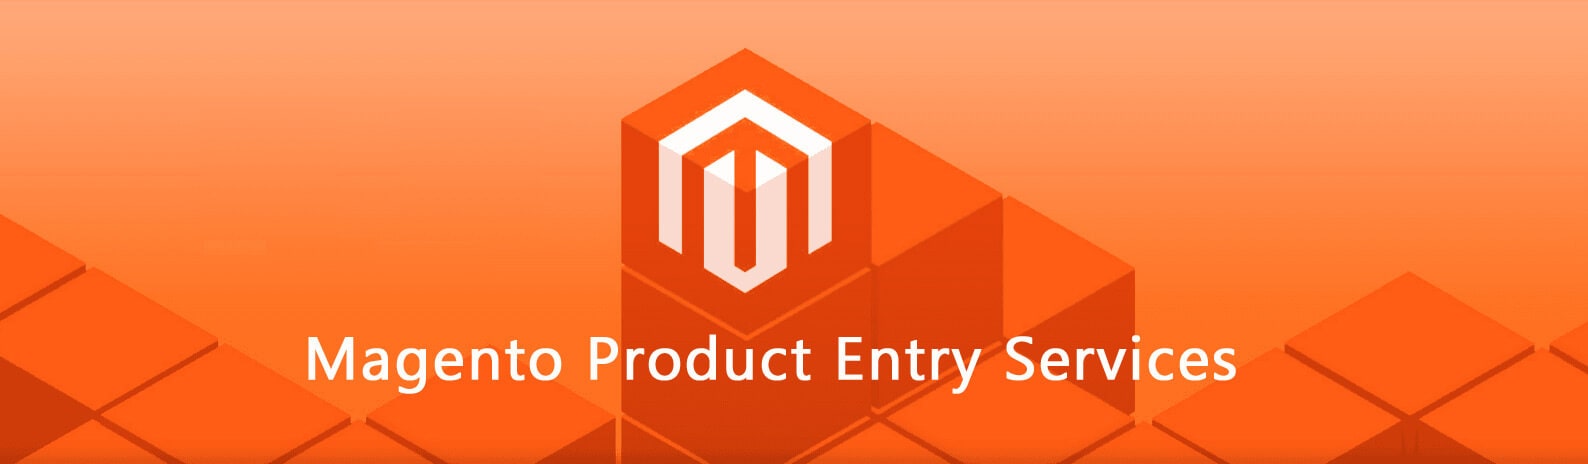 Magento Product Entry Services